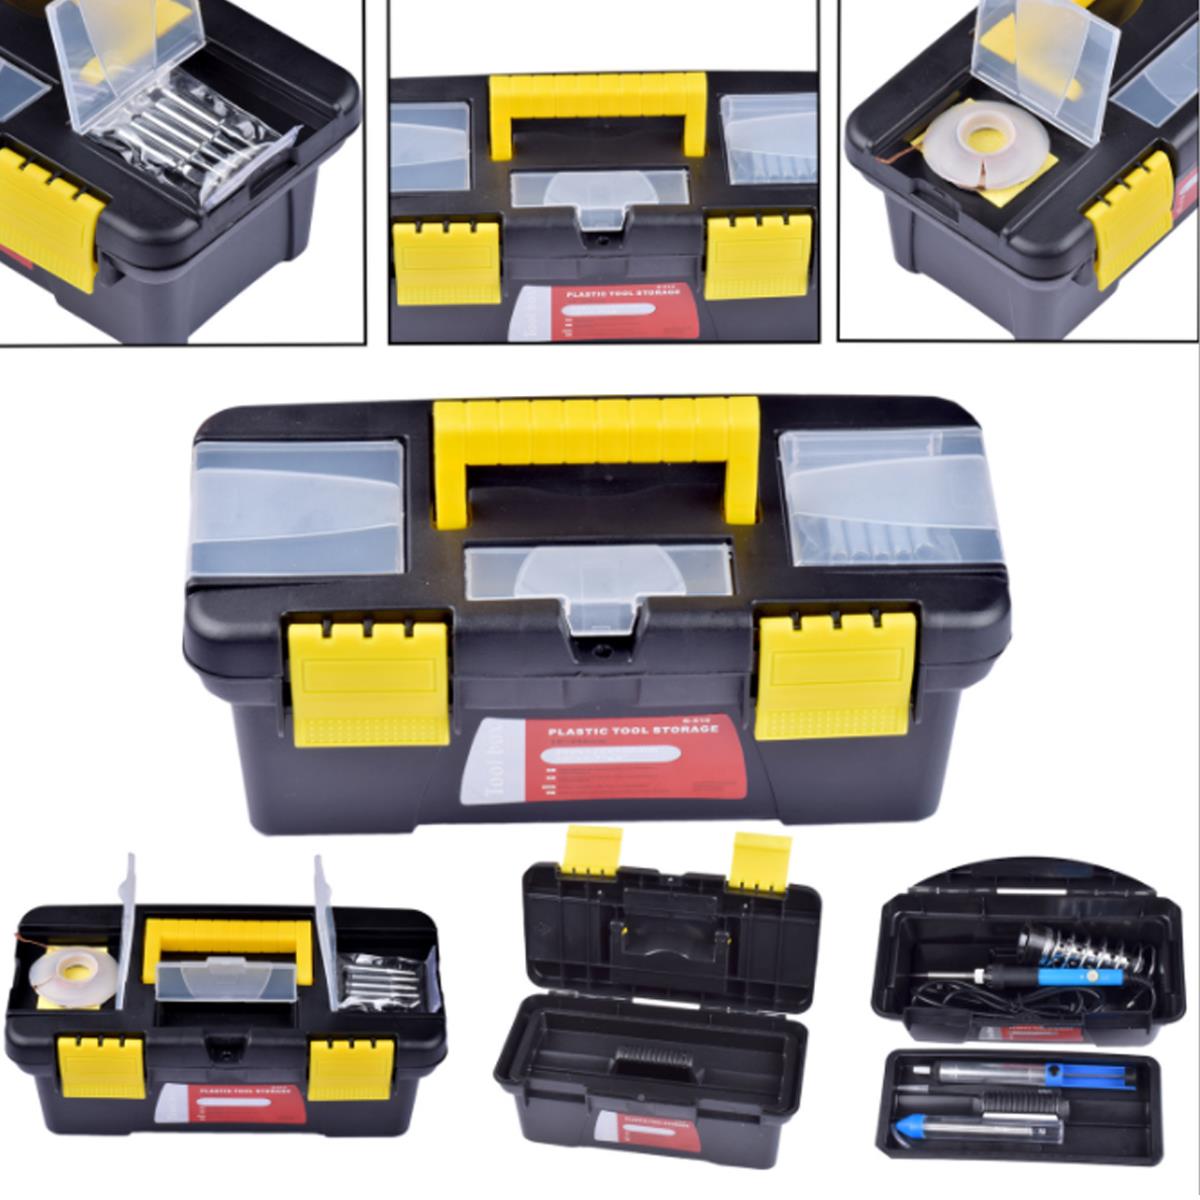 110220V-60W-Adjustable-Temperature-Electric-Welding-Soldering-Tools-Kit-with-Switch-1284249